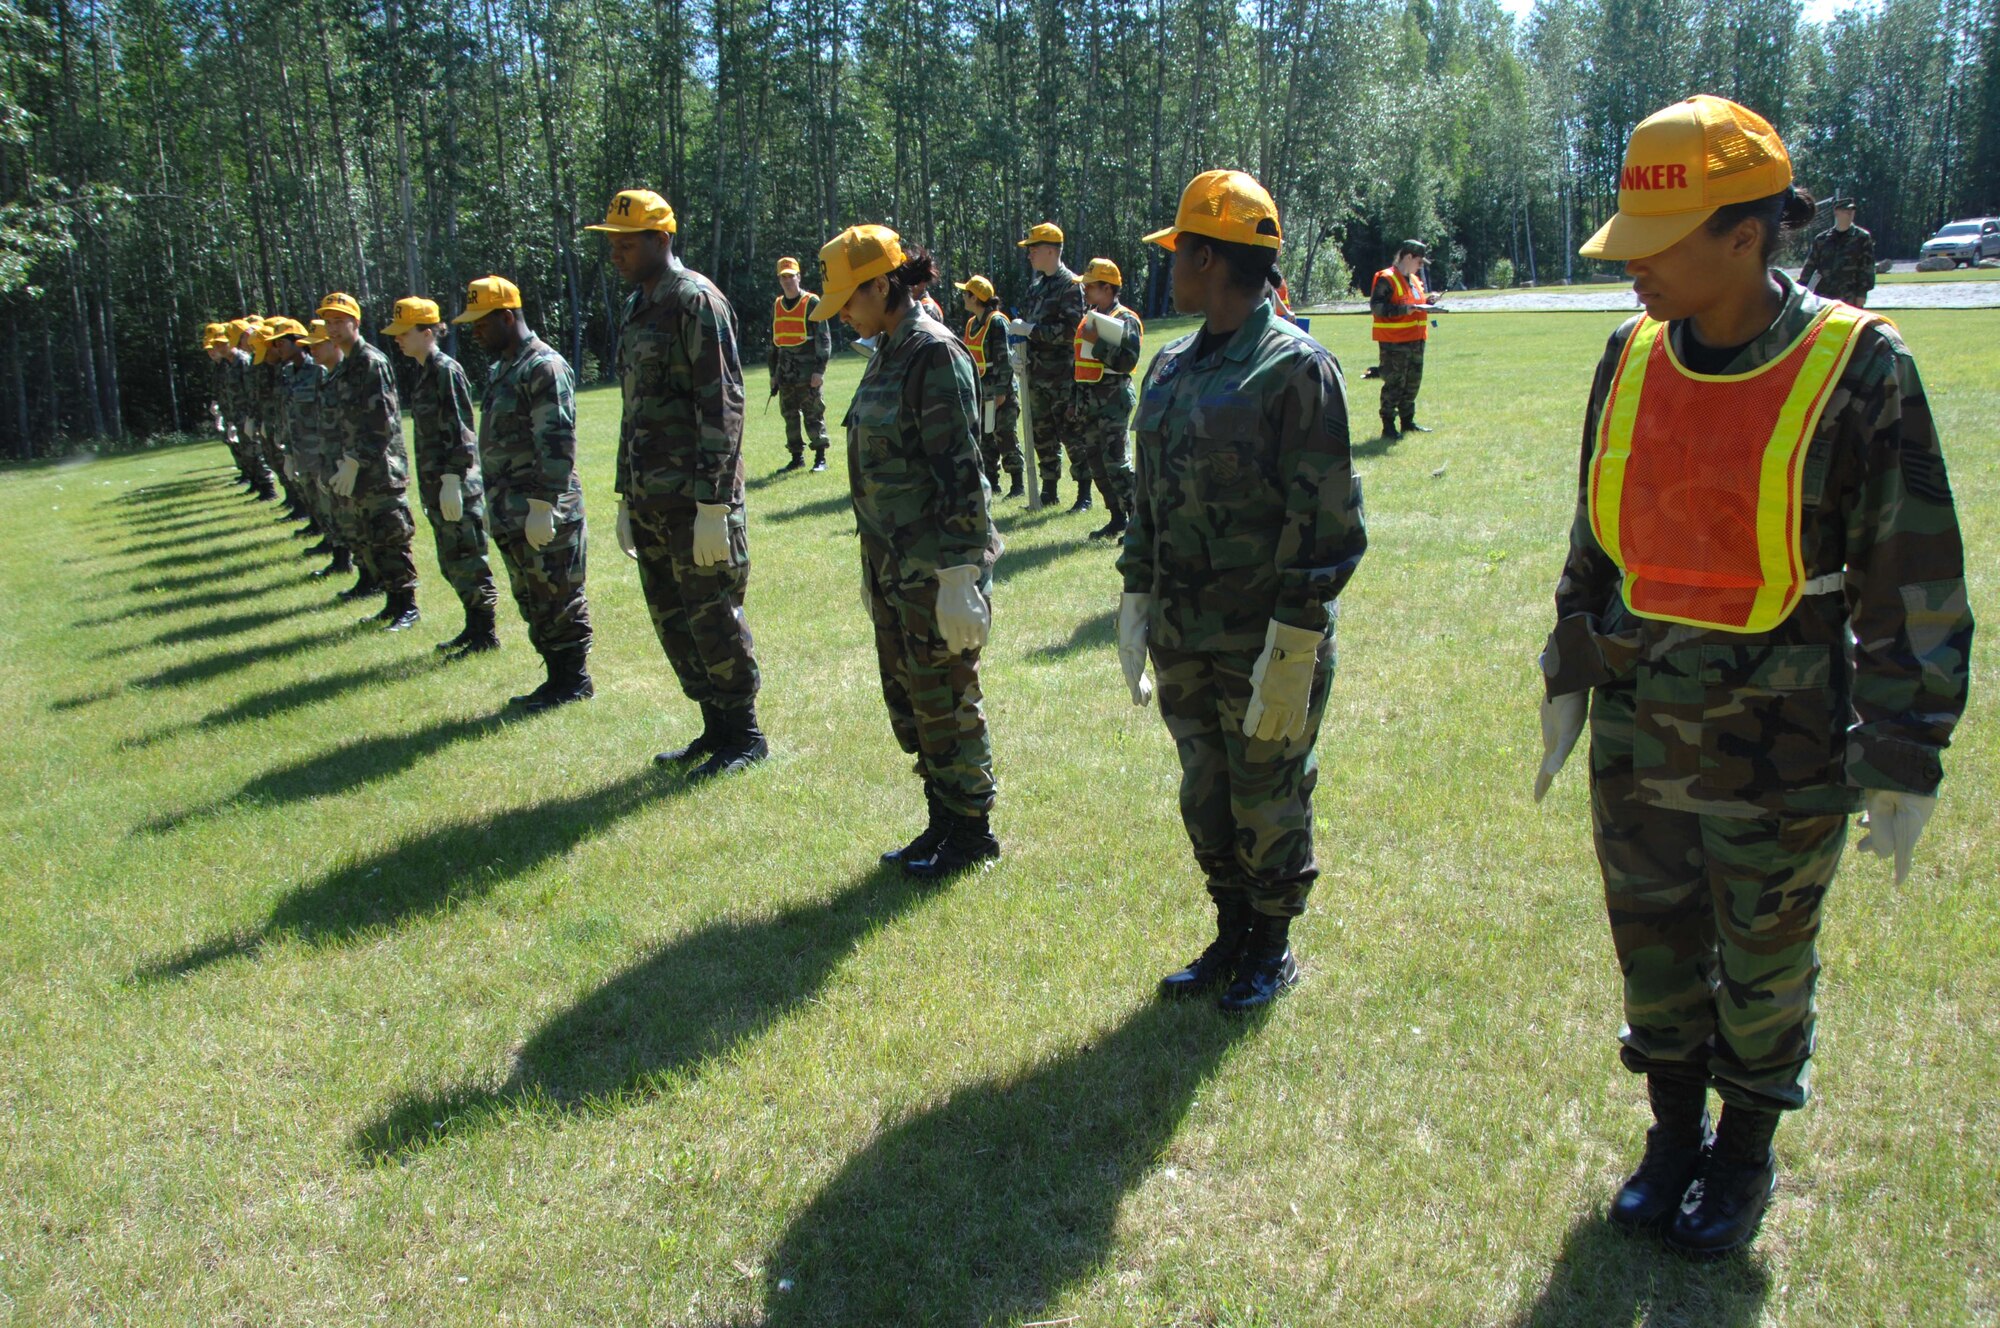 EIELSON AIR FORCE BASE, Alaska -- Members of the 354th Force Support Squadron emergency response search and recovery team conduct a sweep of a simulated aircraft mishap during an emergency management exercise June 19, 2007 here. The exercise was designed to provide a realistic aircraft crash training scenario for emergency teams. (U.S. Air Force photo by Staff Sgt. Tia Schroeder)